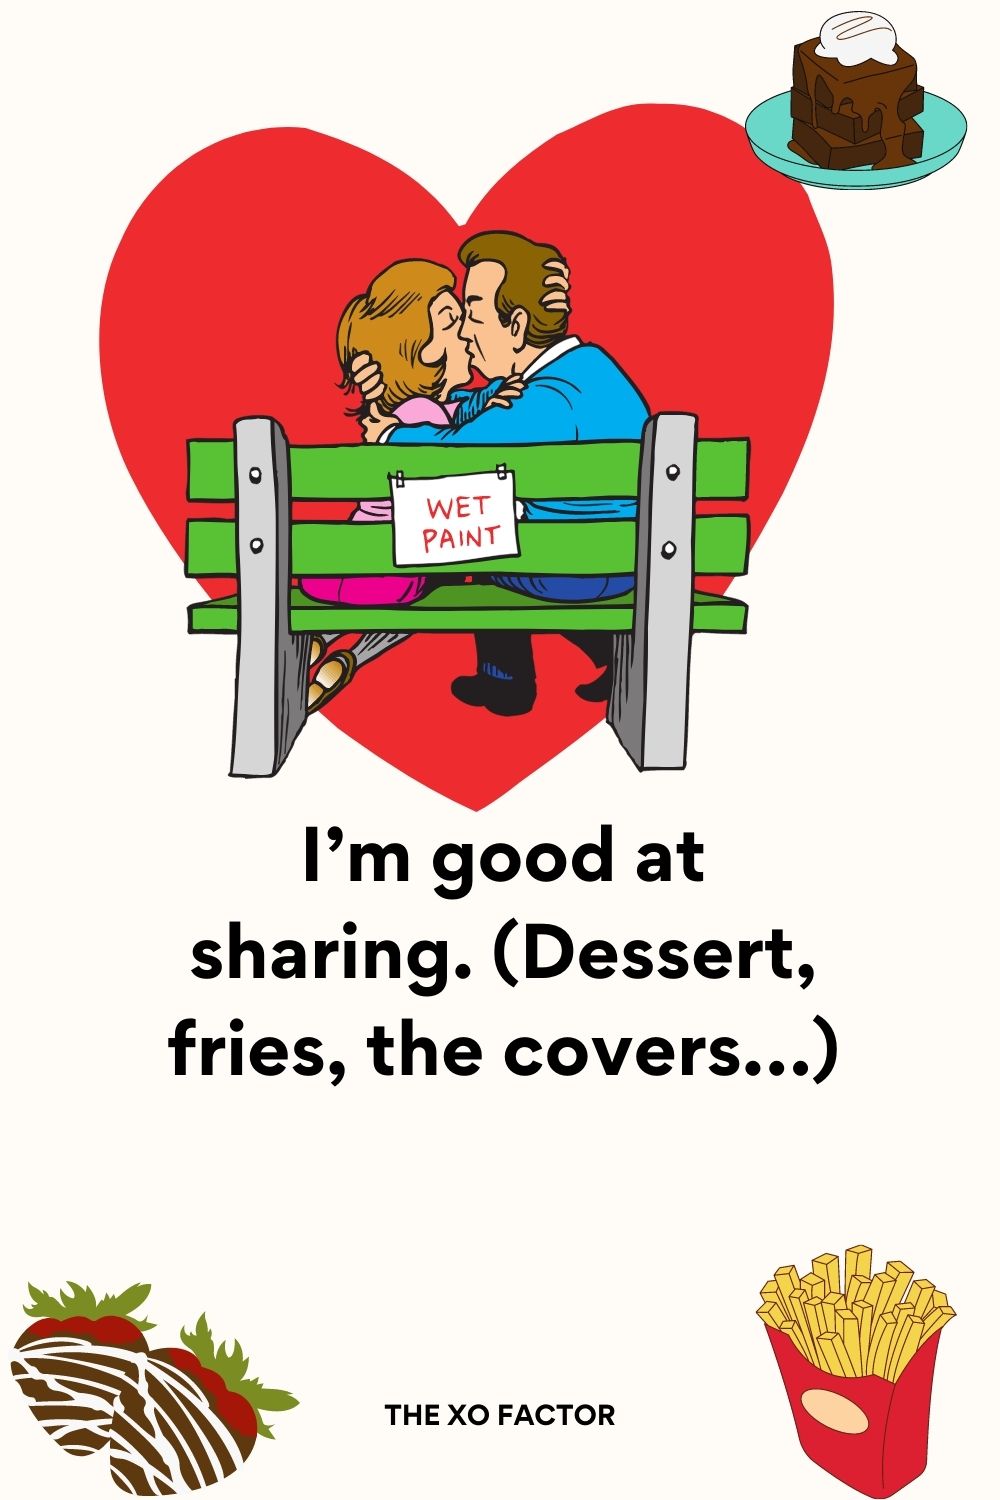 I’m good at sharing. (Dessert, fries, the covers…)